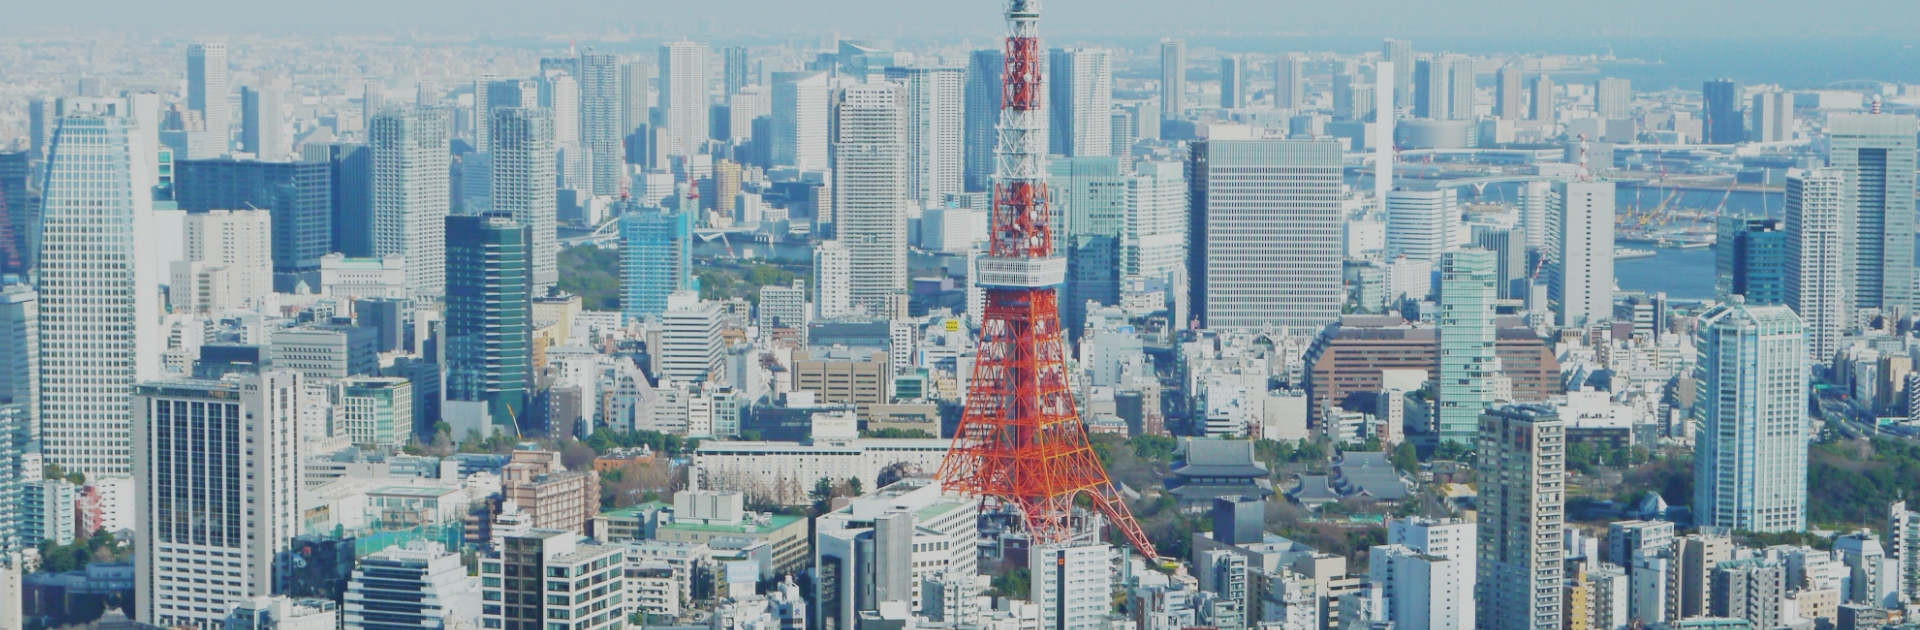 An event participation announcement by SHL Medical titled “SHL Medical returns to PFSS Tokyo 2023 this summer” featuring Tokyo Tower